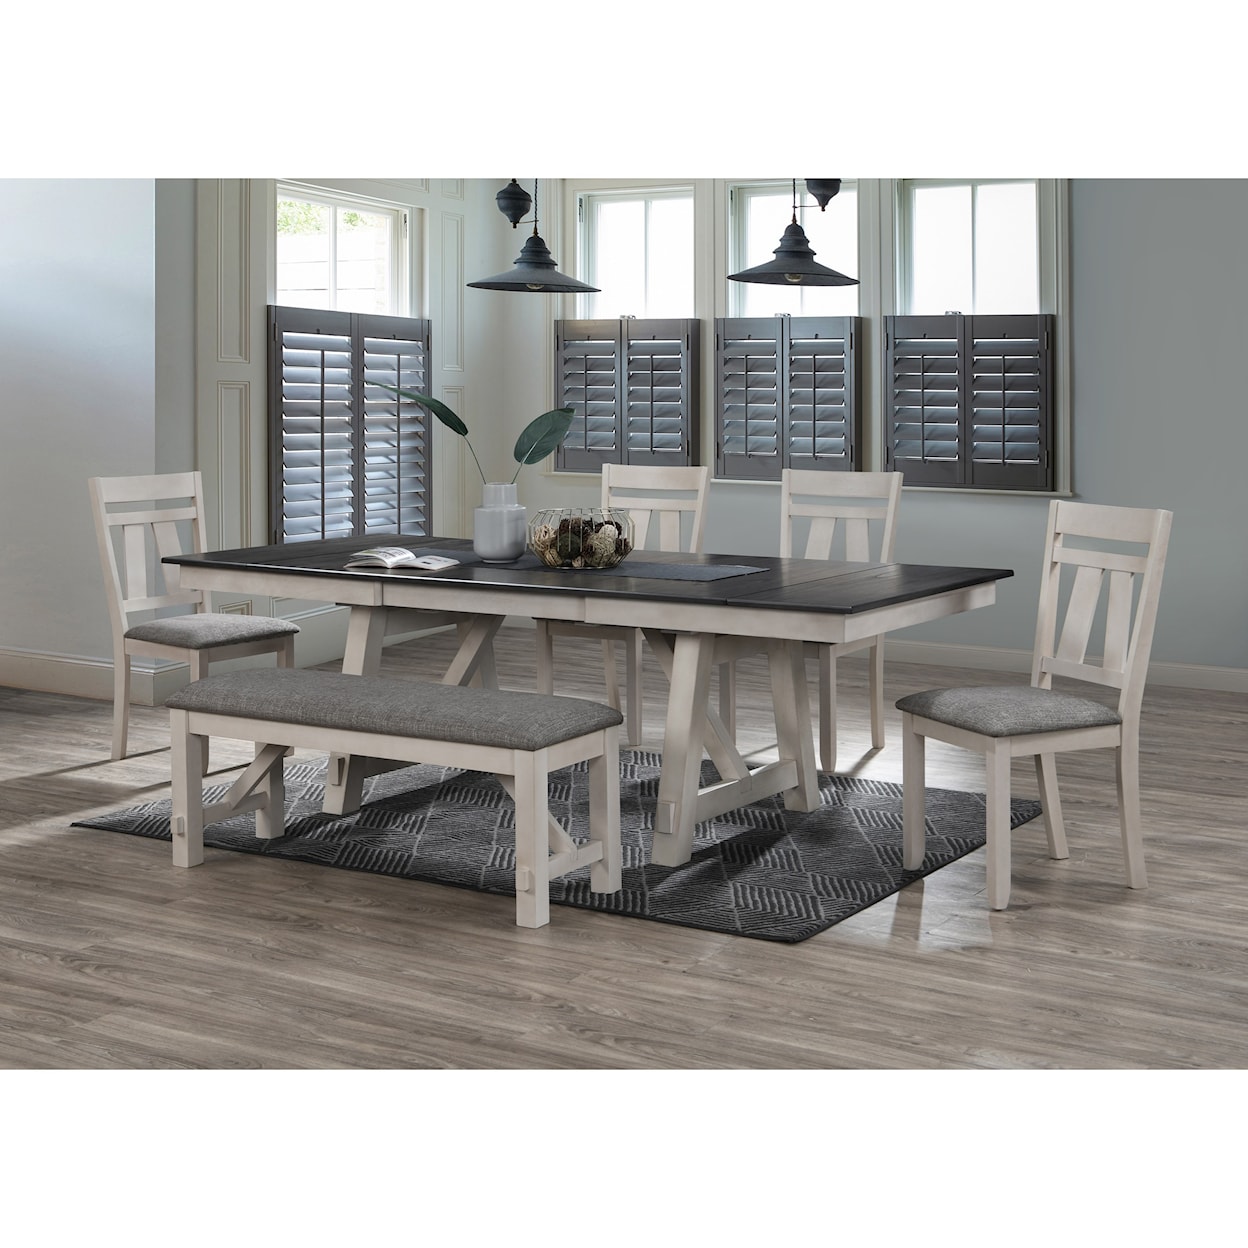 CM Maribelle 6-Piece Table and Chair Set with Bench